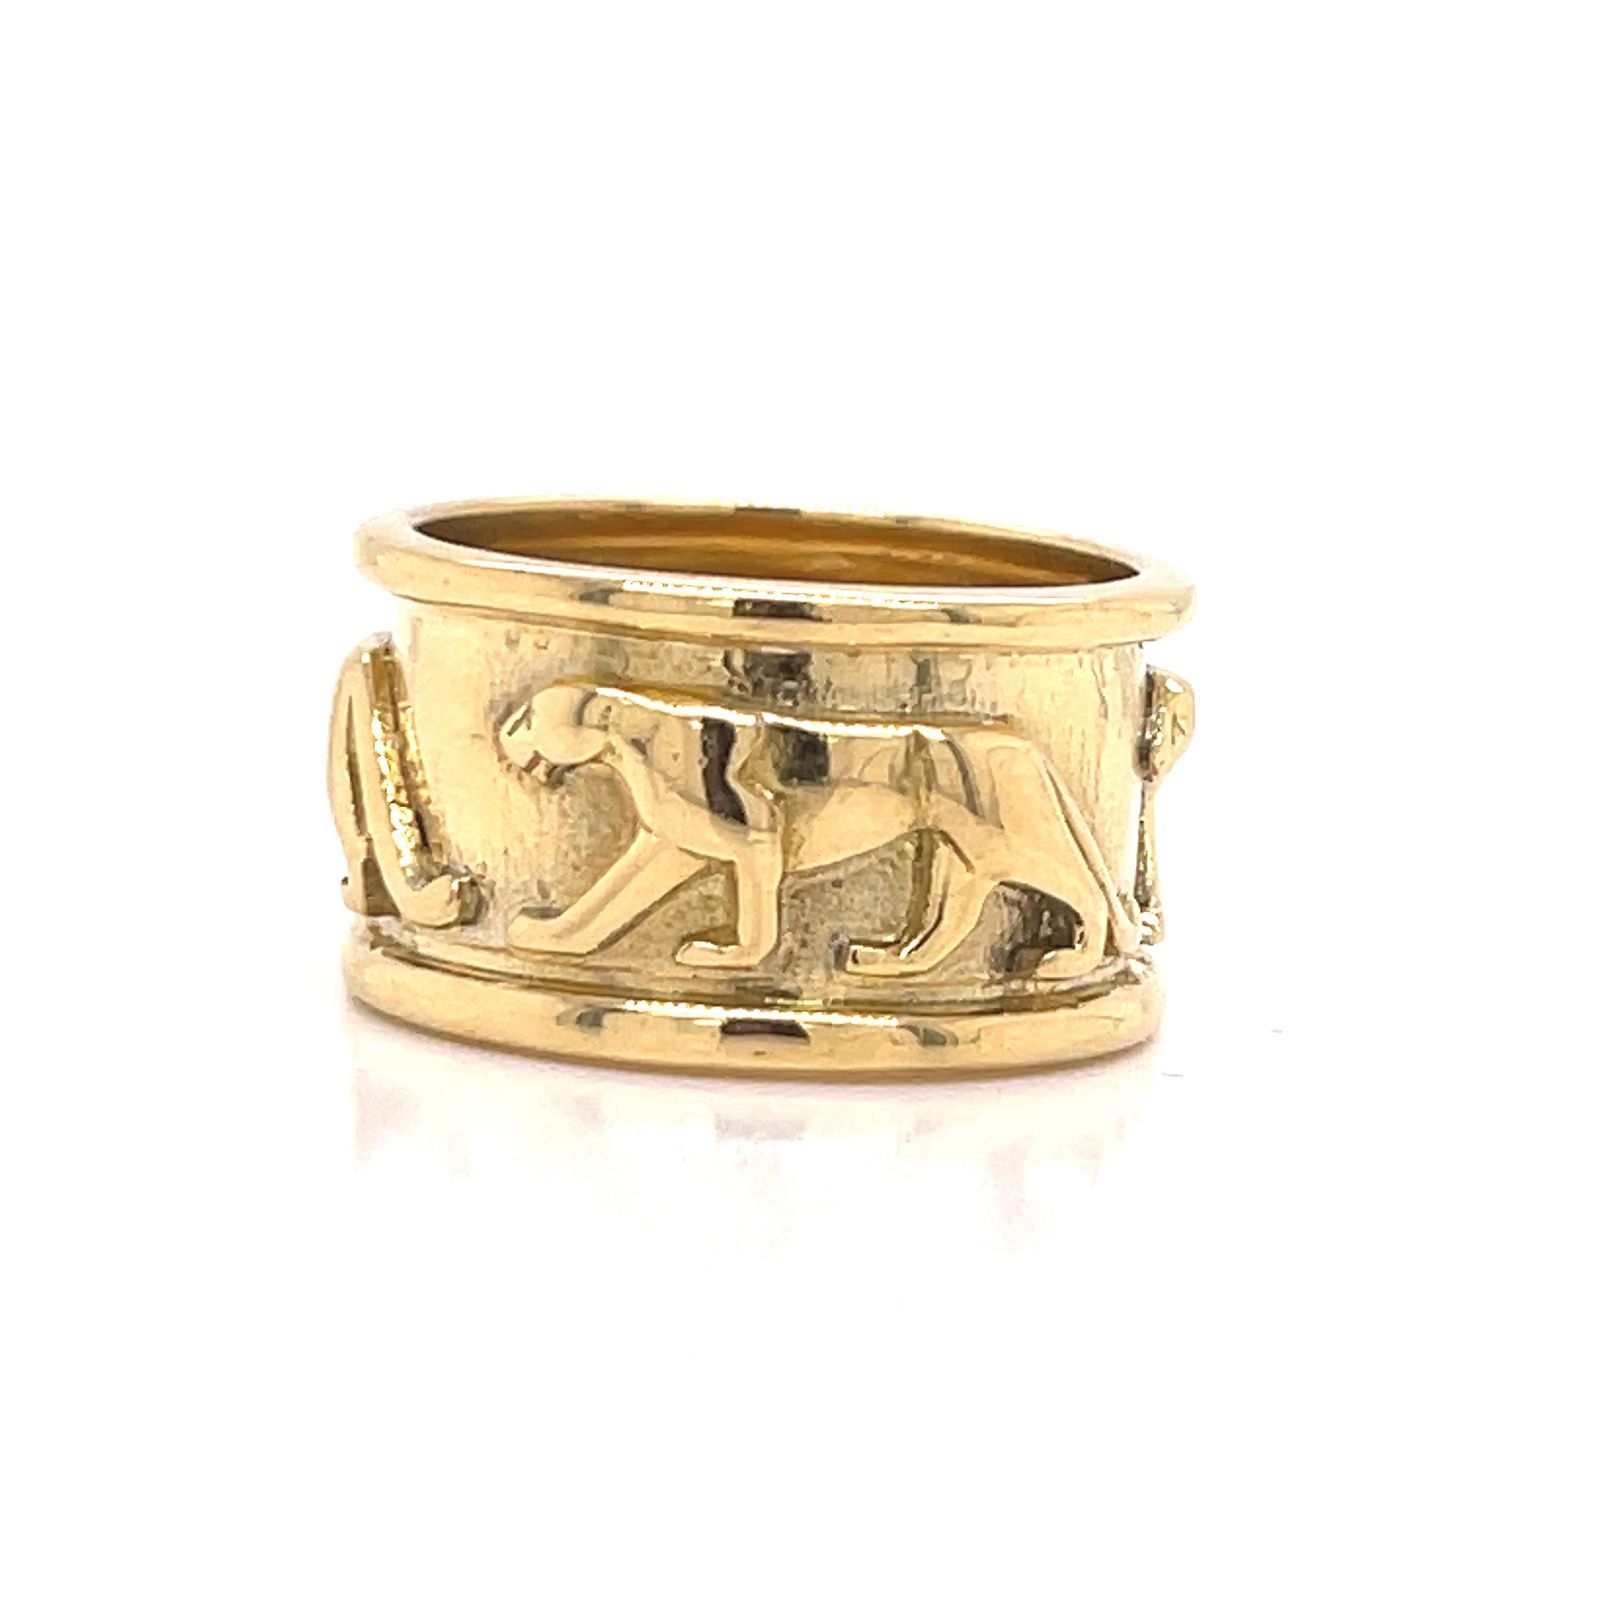 18k Cartier Style Panther Ring Or jaune 18k Poids 9.9g Bague Panthère Style Cart&hellip;